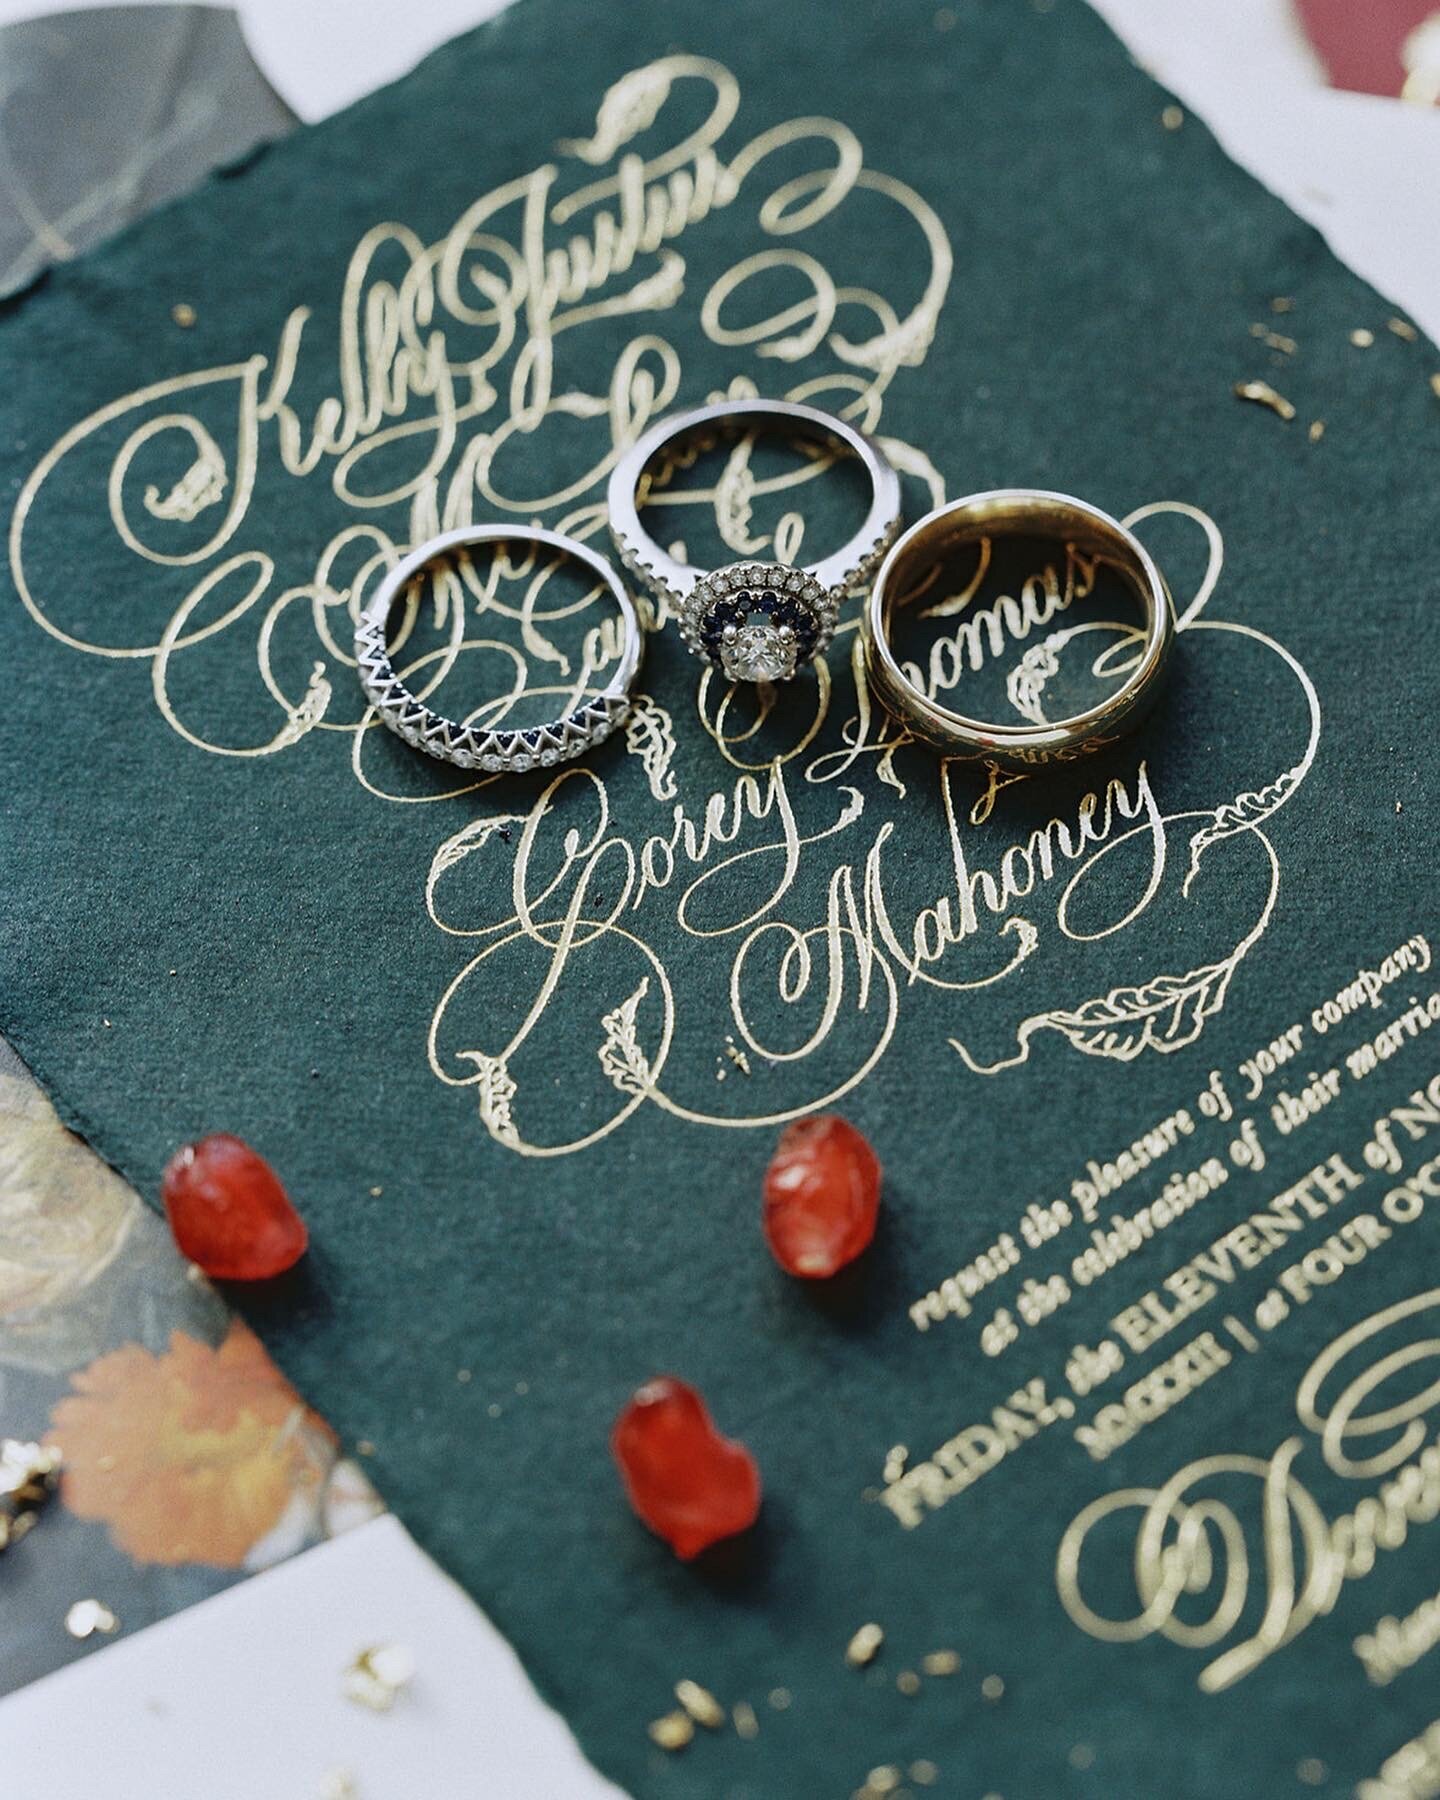 Green themed wedding invitation with calligraphy and the wedding bands on top